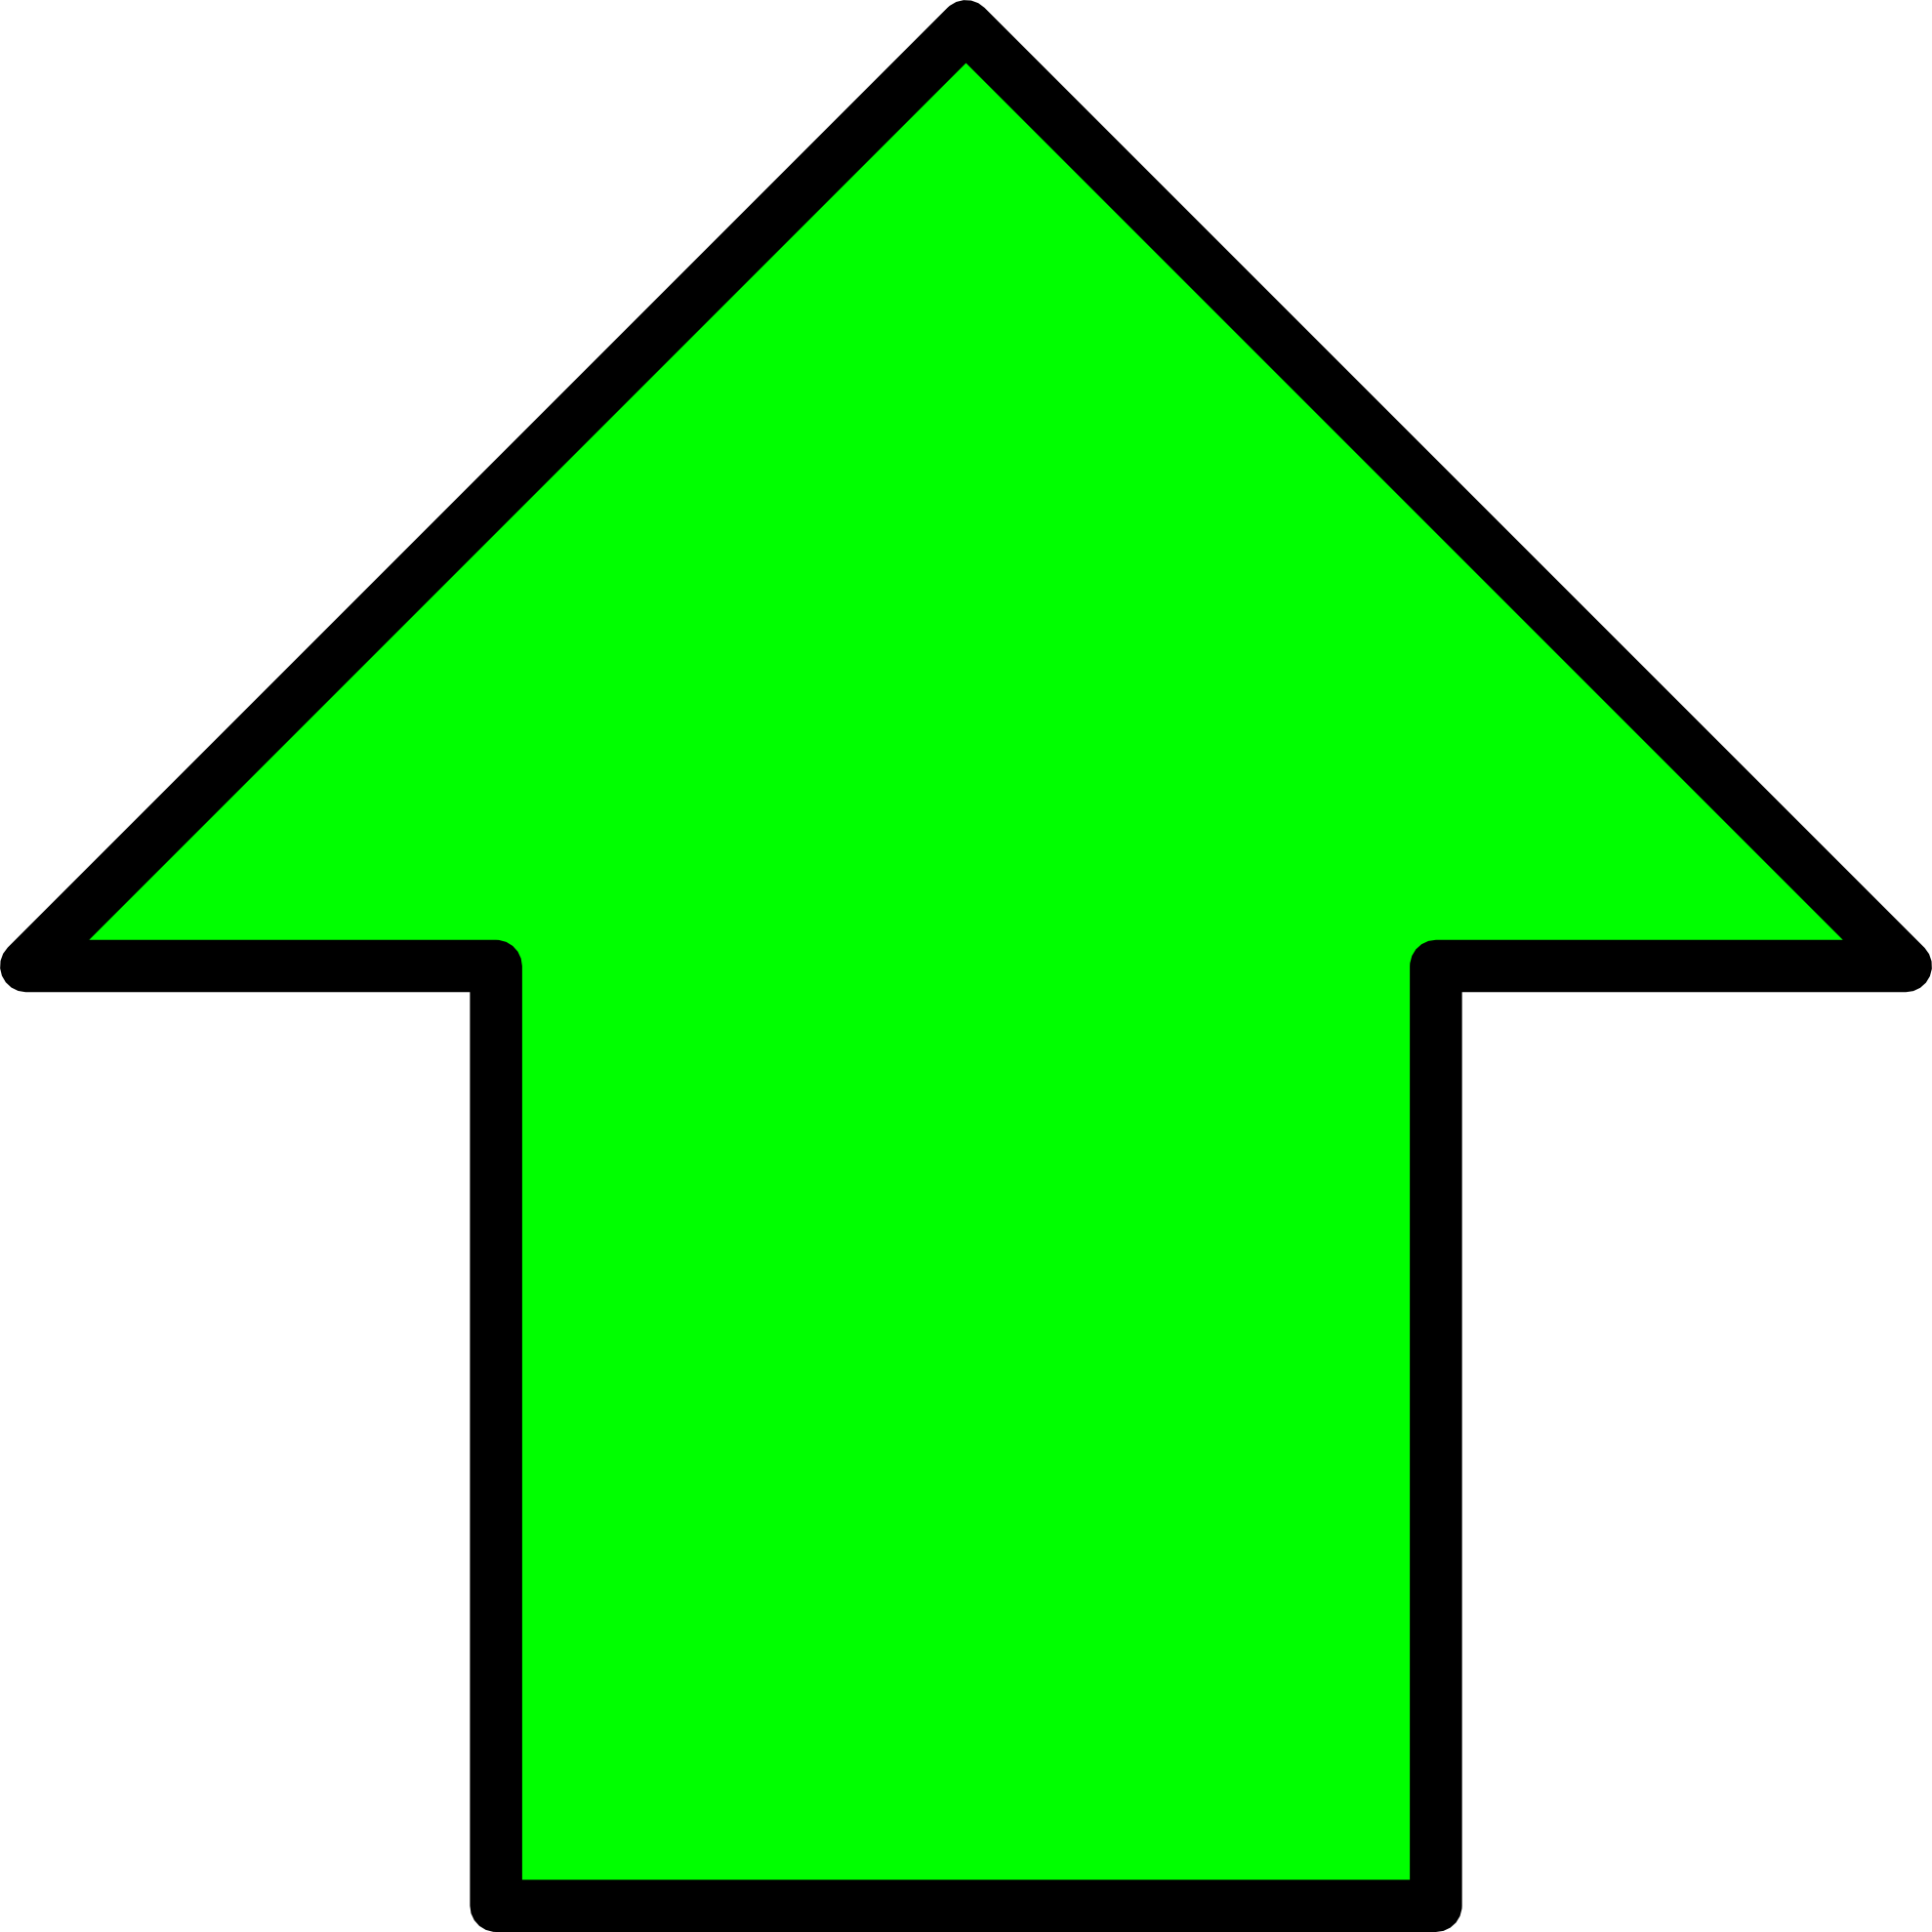 31 Up Arrow Png   Free Cliparts That You Can Download To You Computer    